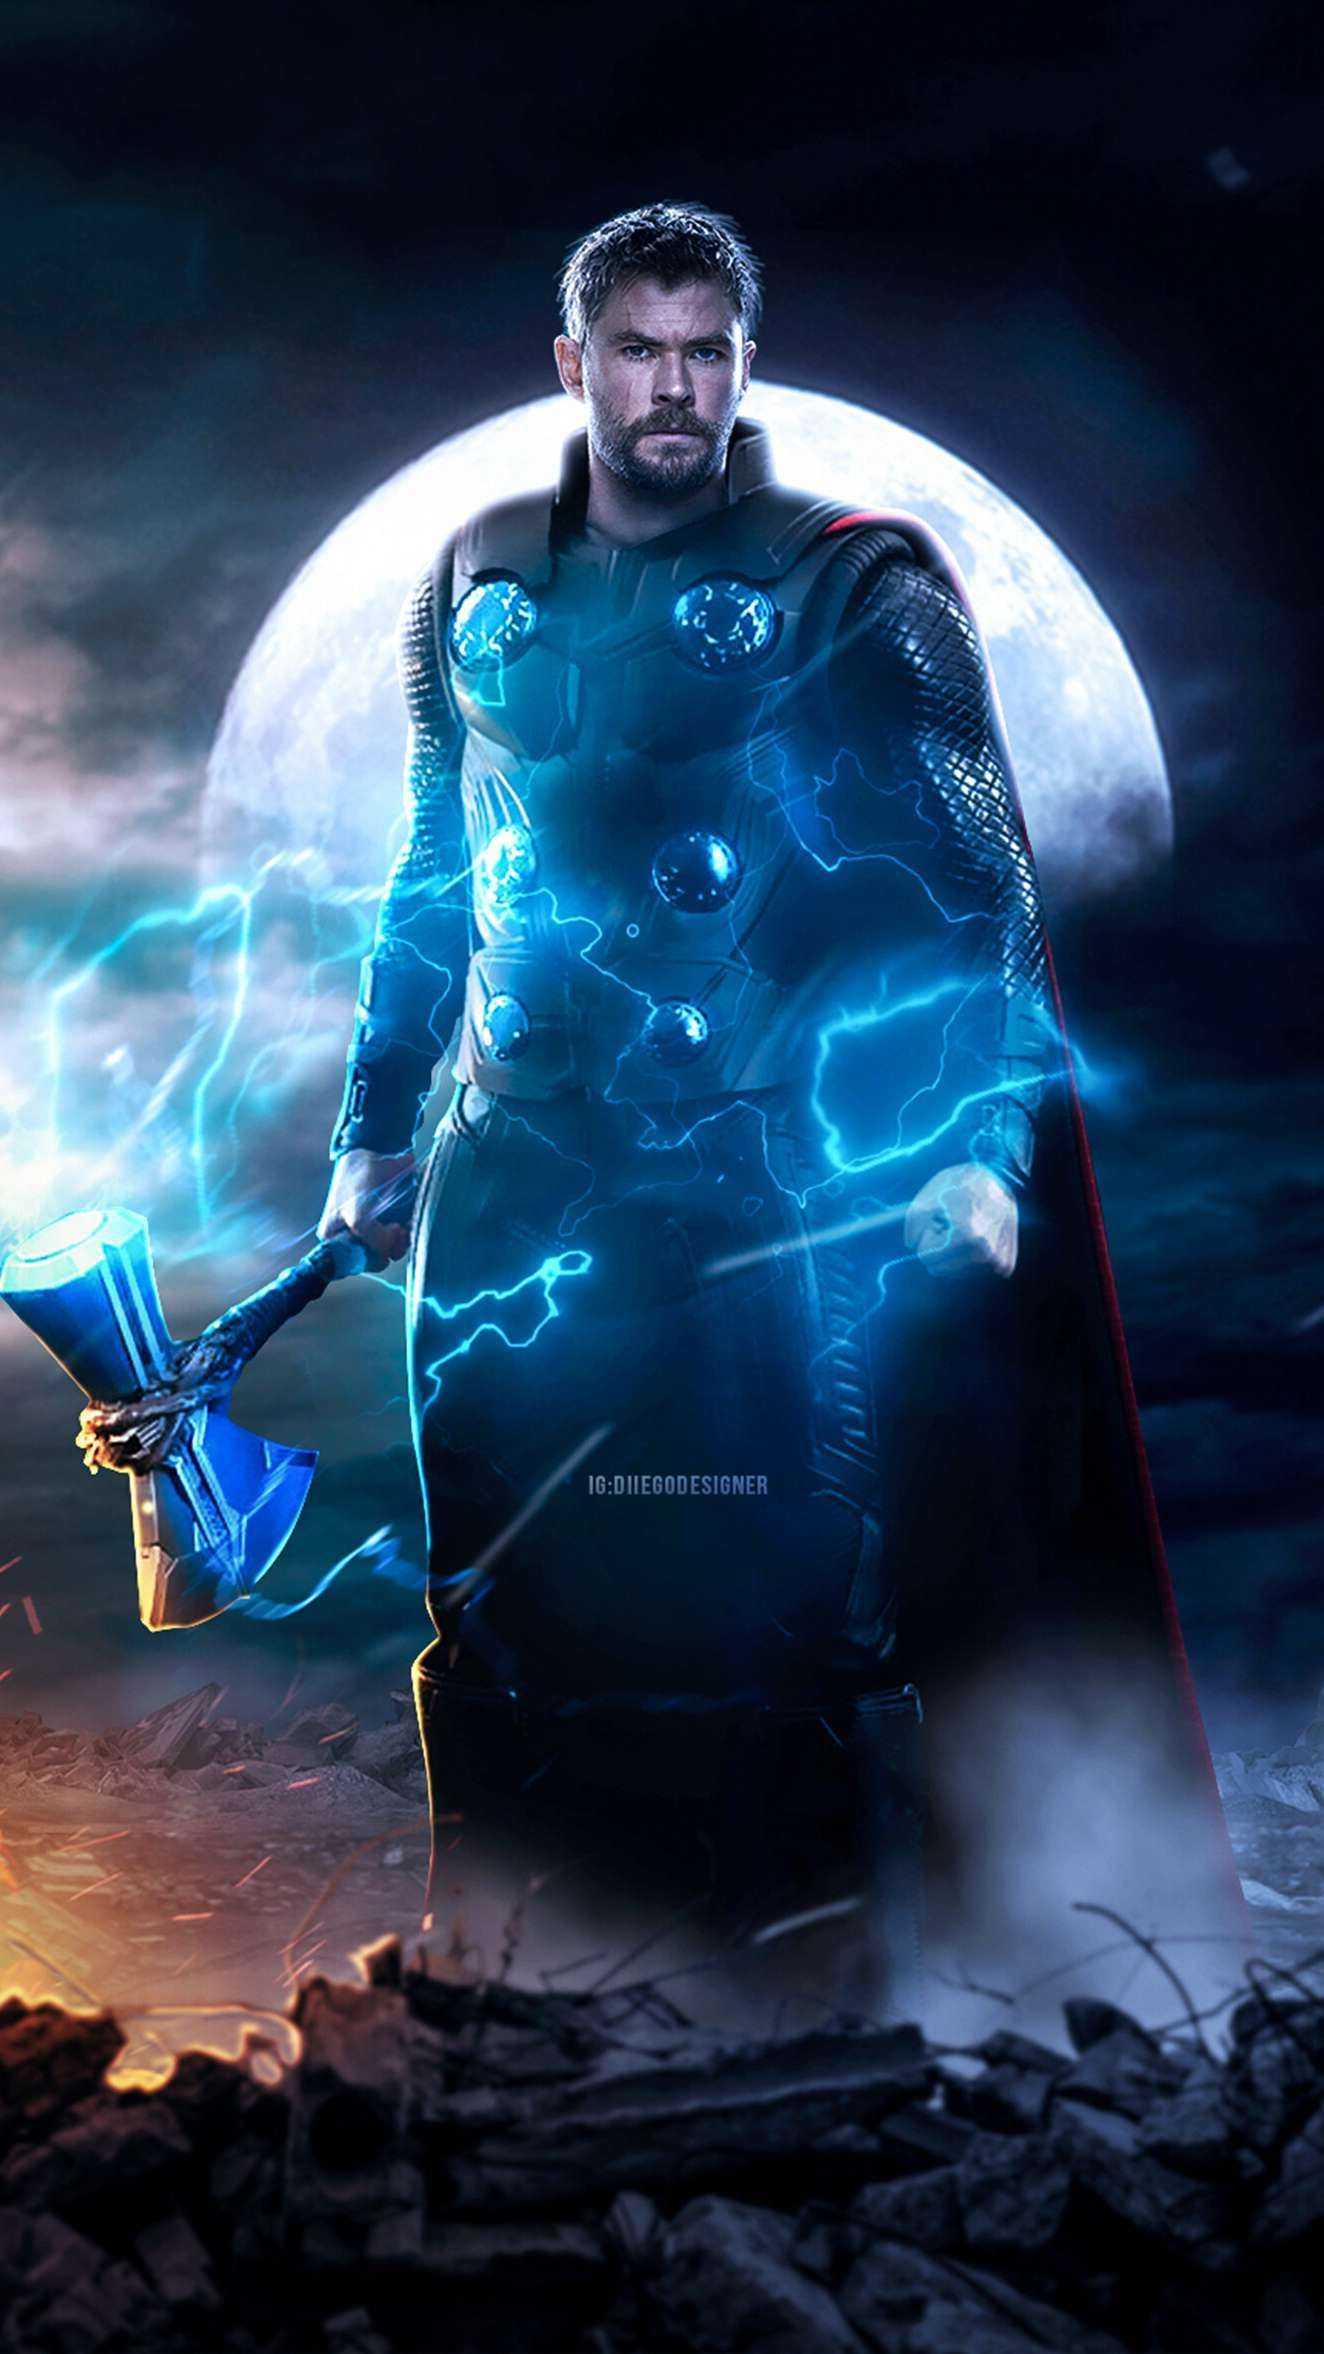 Thor standing in front of a full moon holding his hammer in his hand - Thor